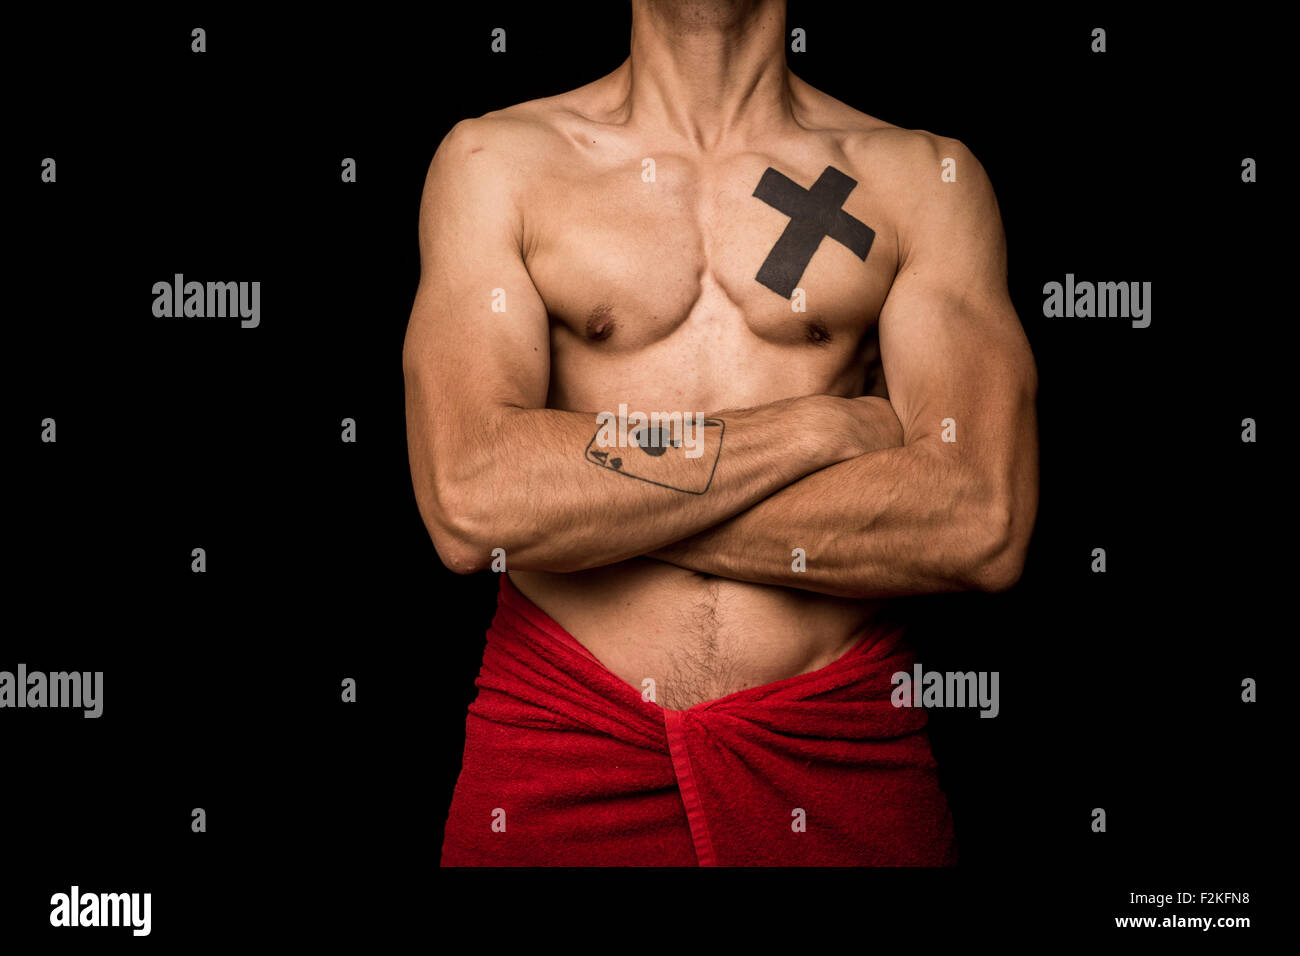 a fit, tattooed young man stands against a black background with a red towel around his waist, displaying his muscles Stock Photo